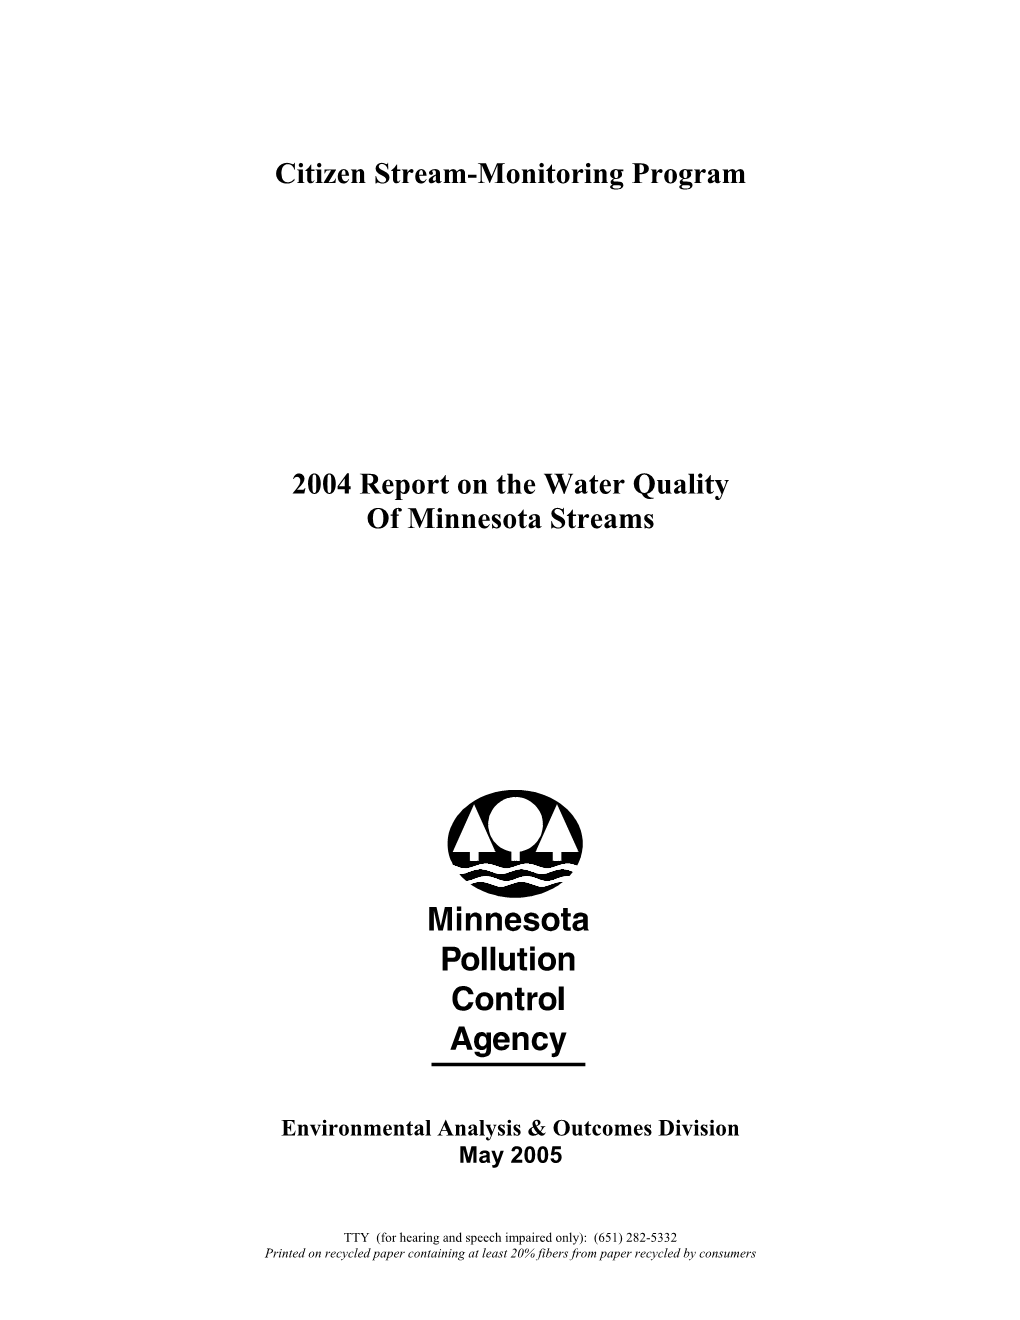 2004 Report on the Water Quality of Minnesota Streams